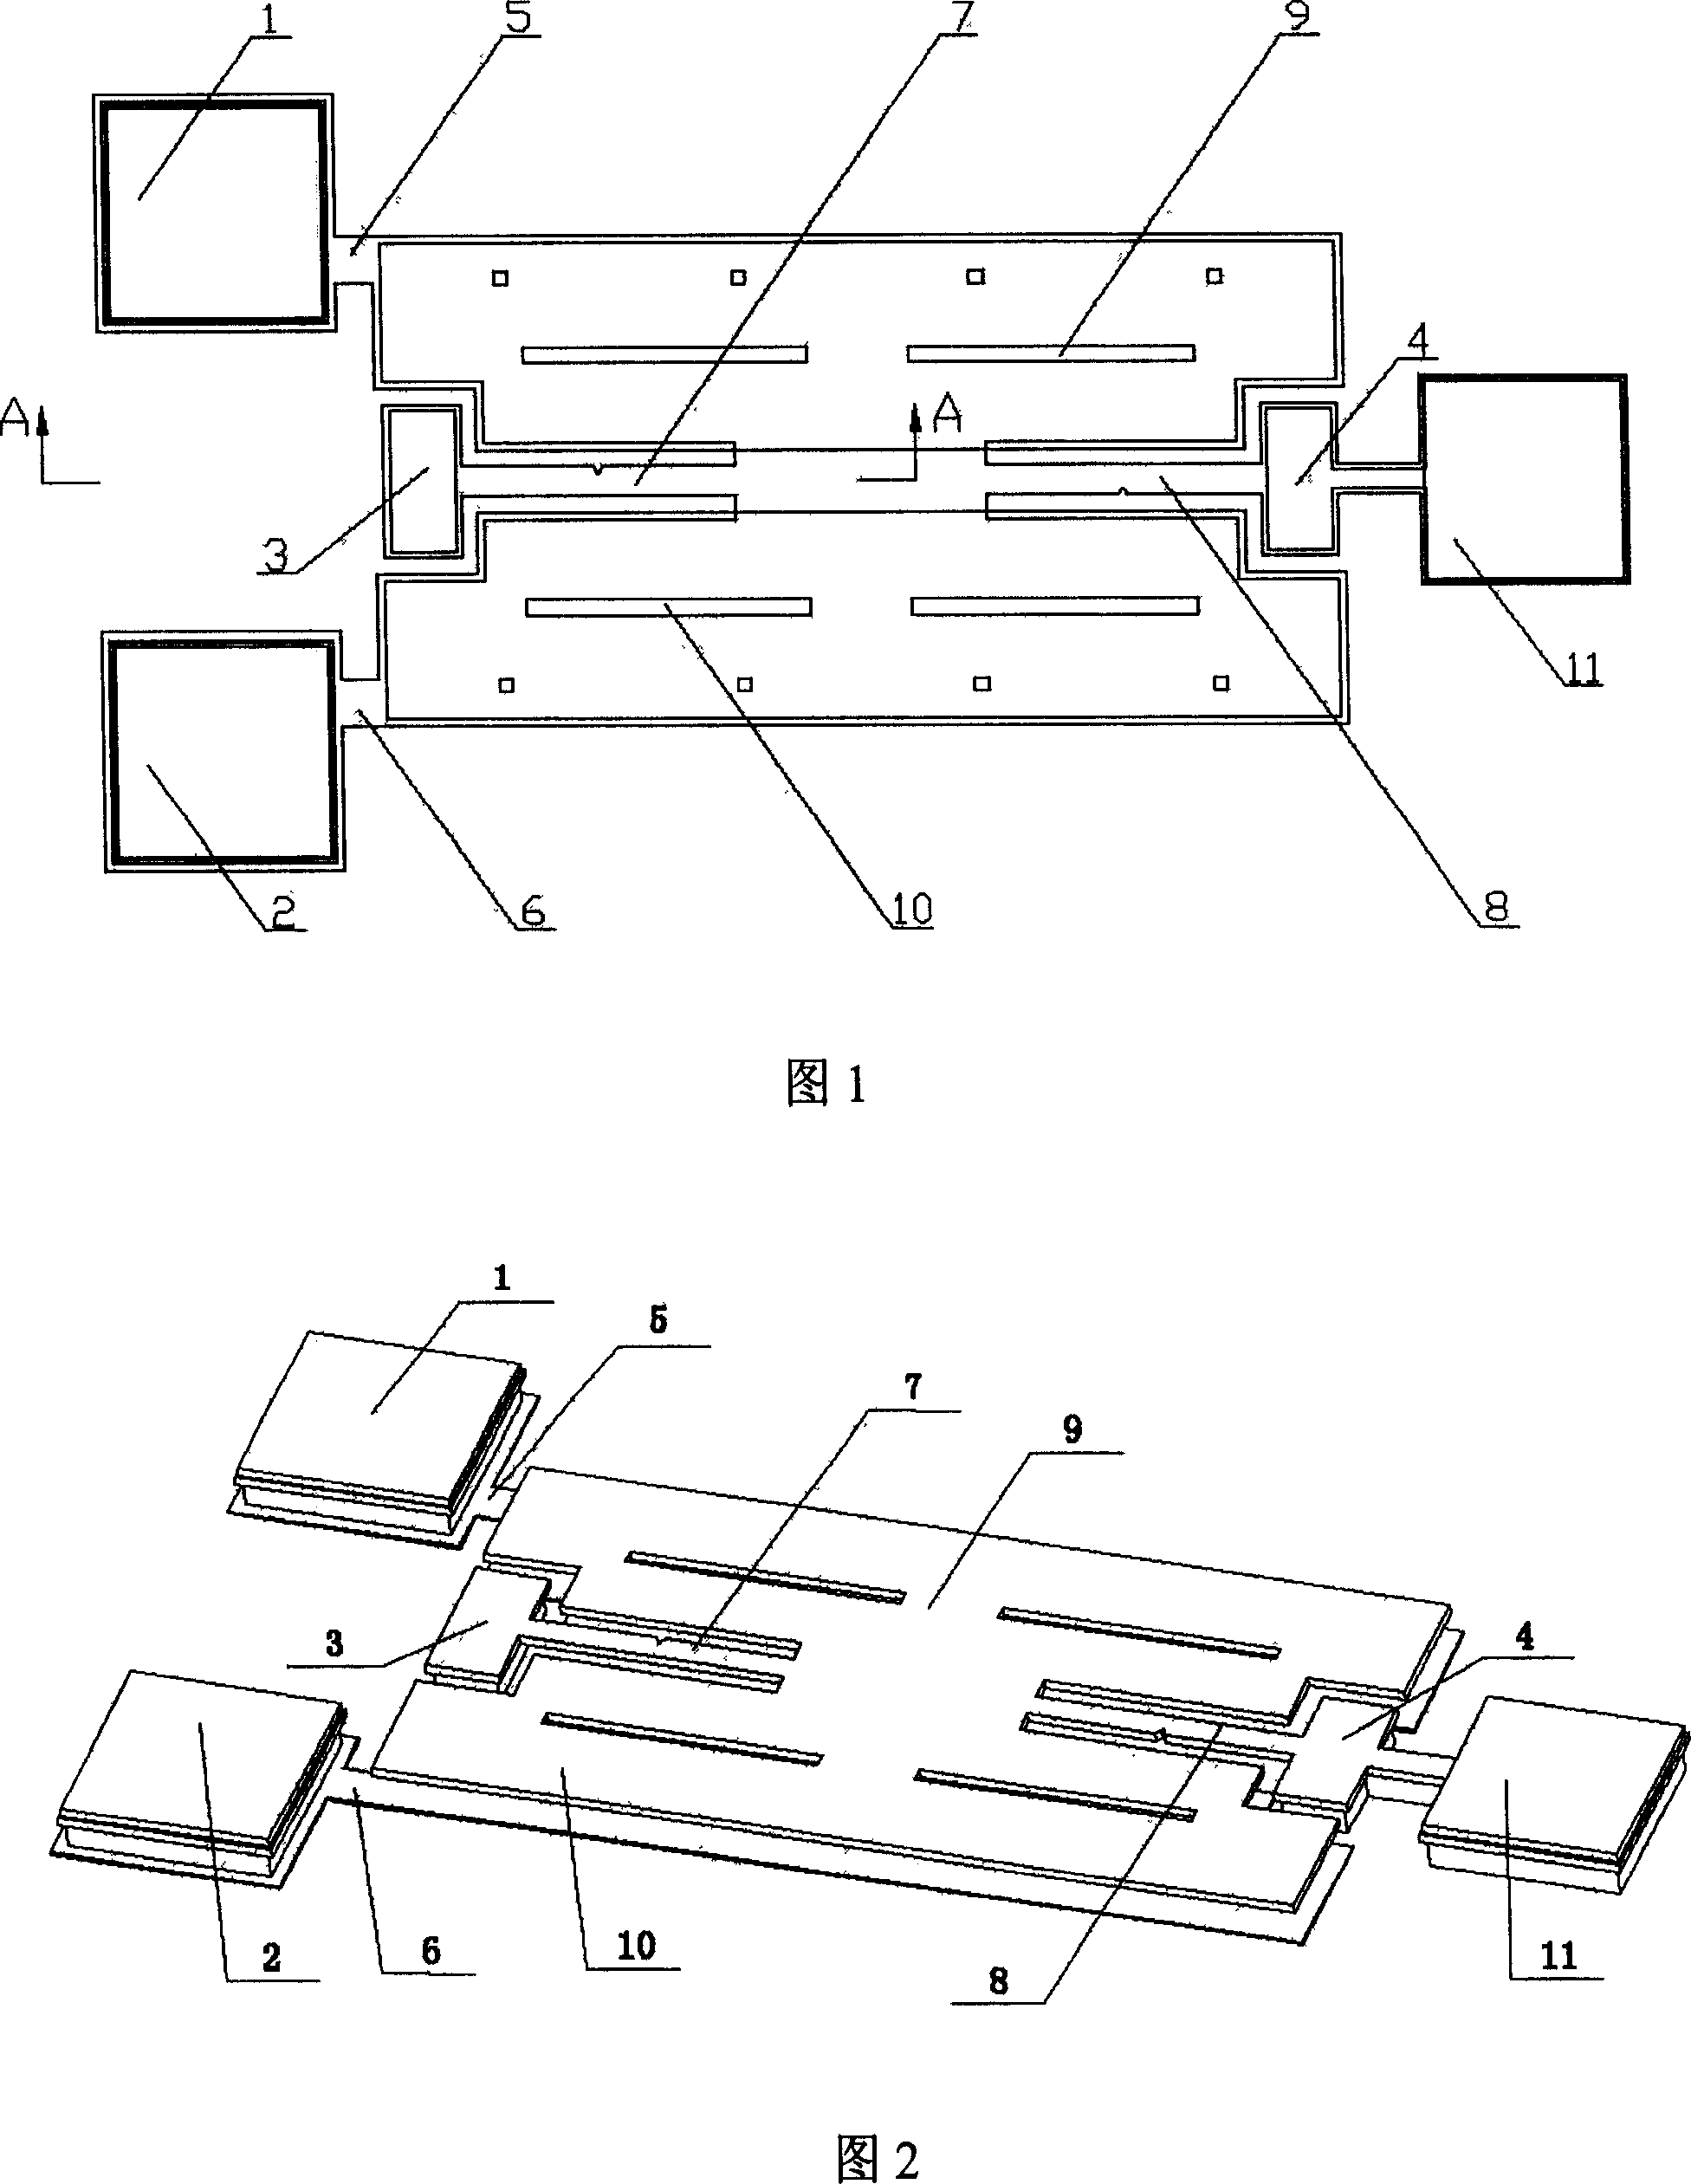 Endurance testing apparatus of micro-structure crankle driven by parallel plate capacitance